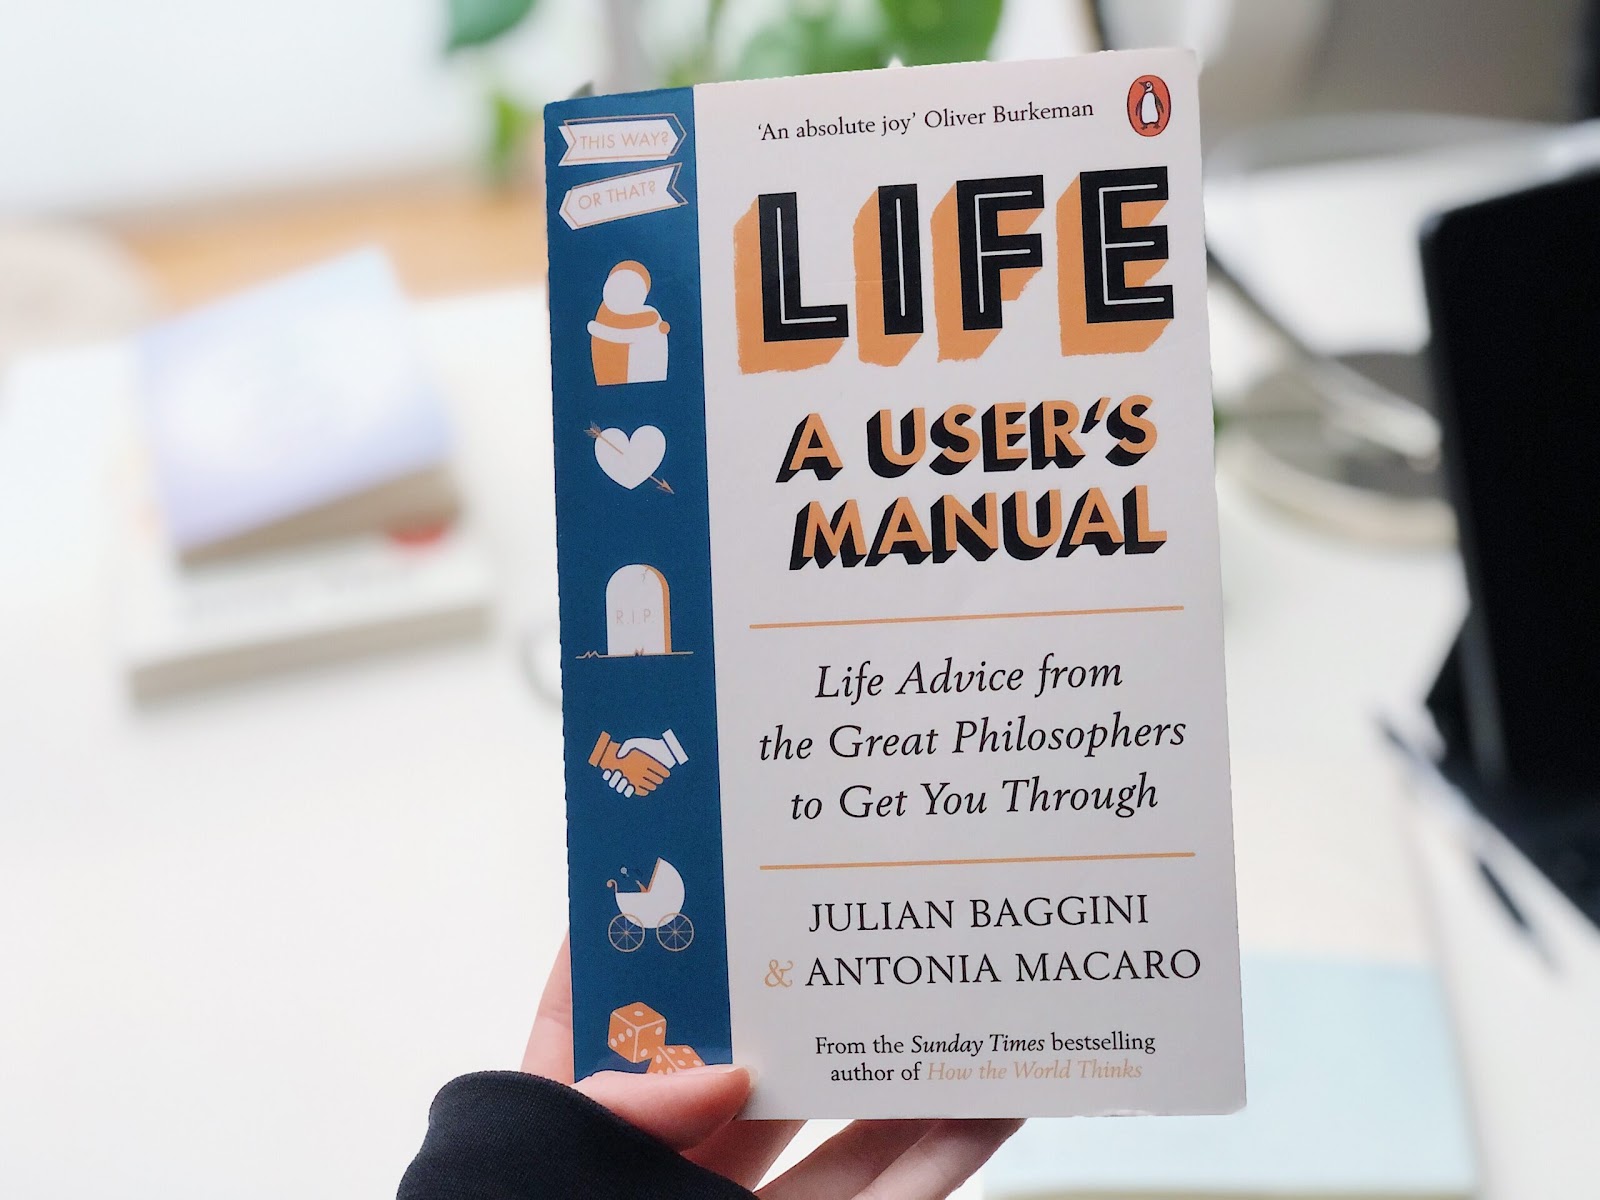 Book recommendation 2022: Philosophy and life